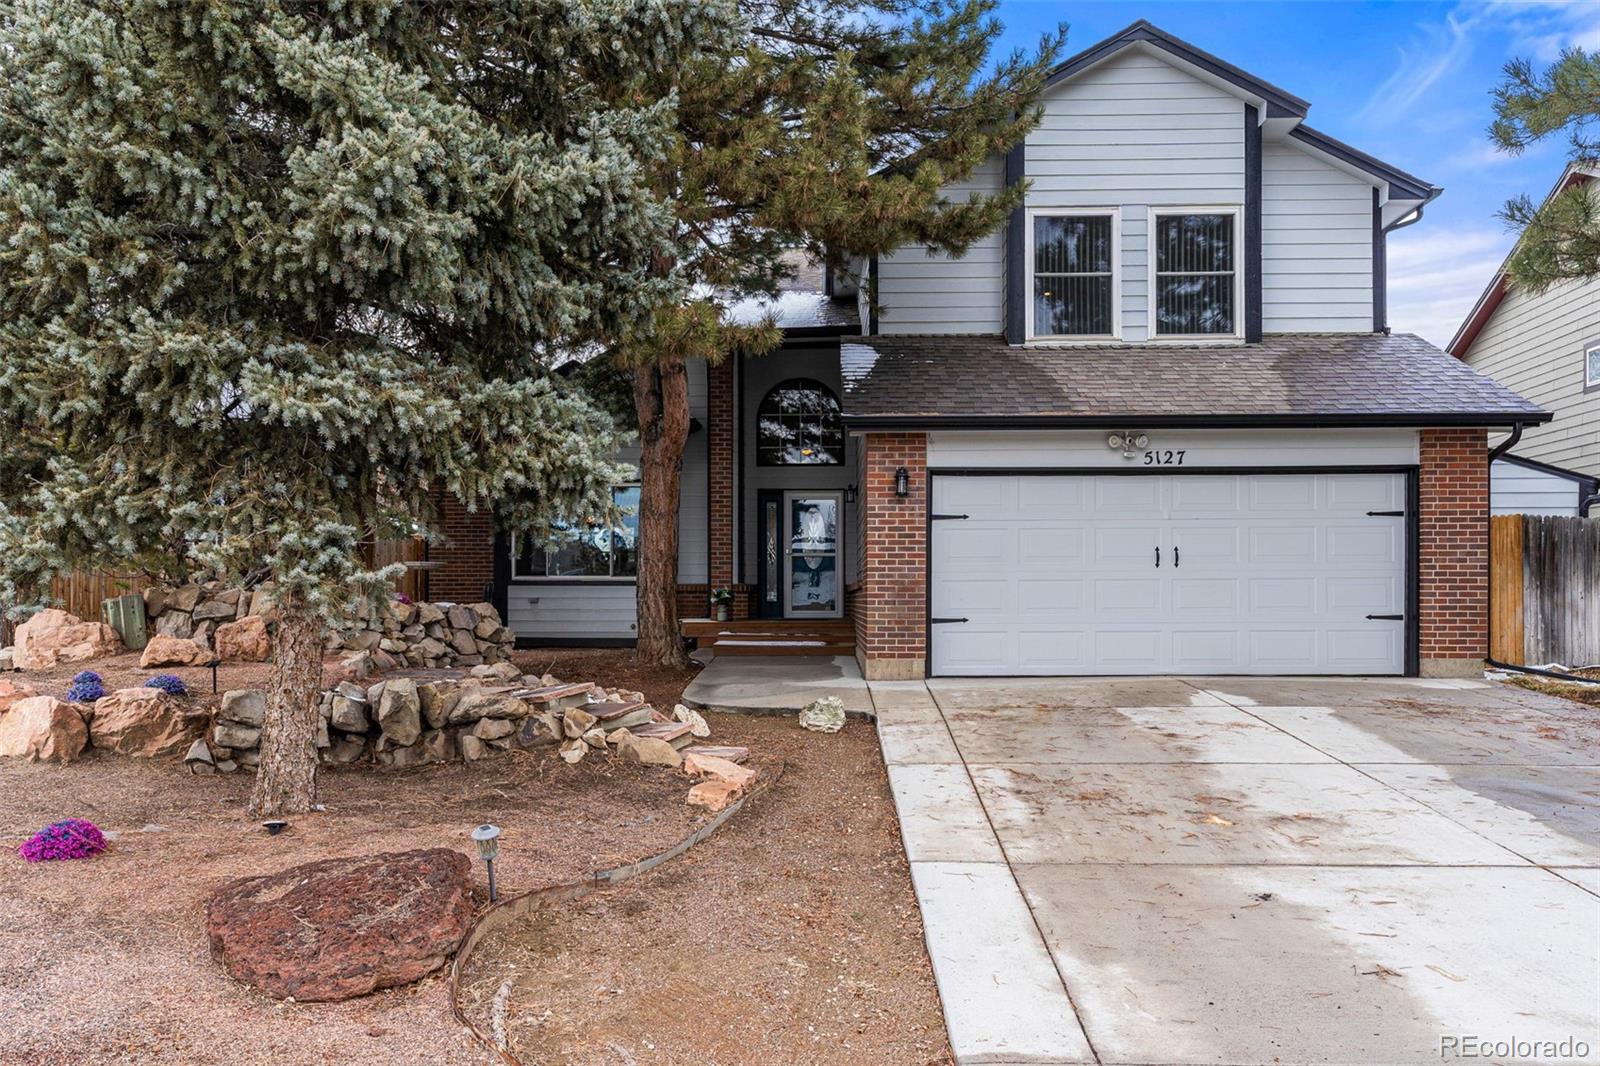 Report Image for 5127 W 69th Loop,Westminster, Colorado